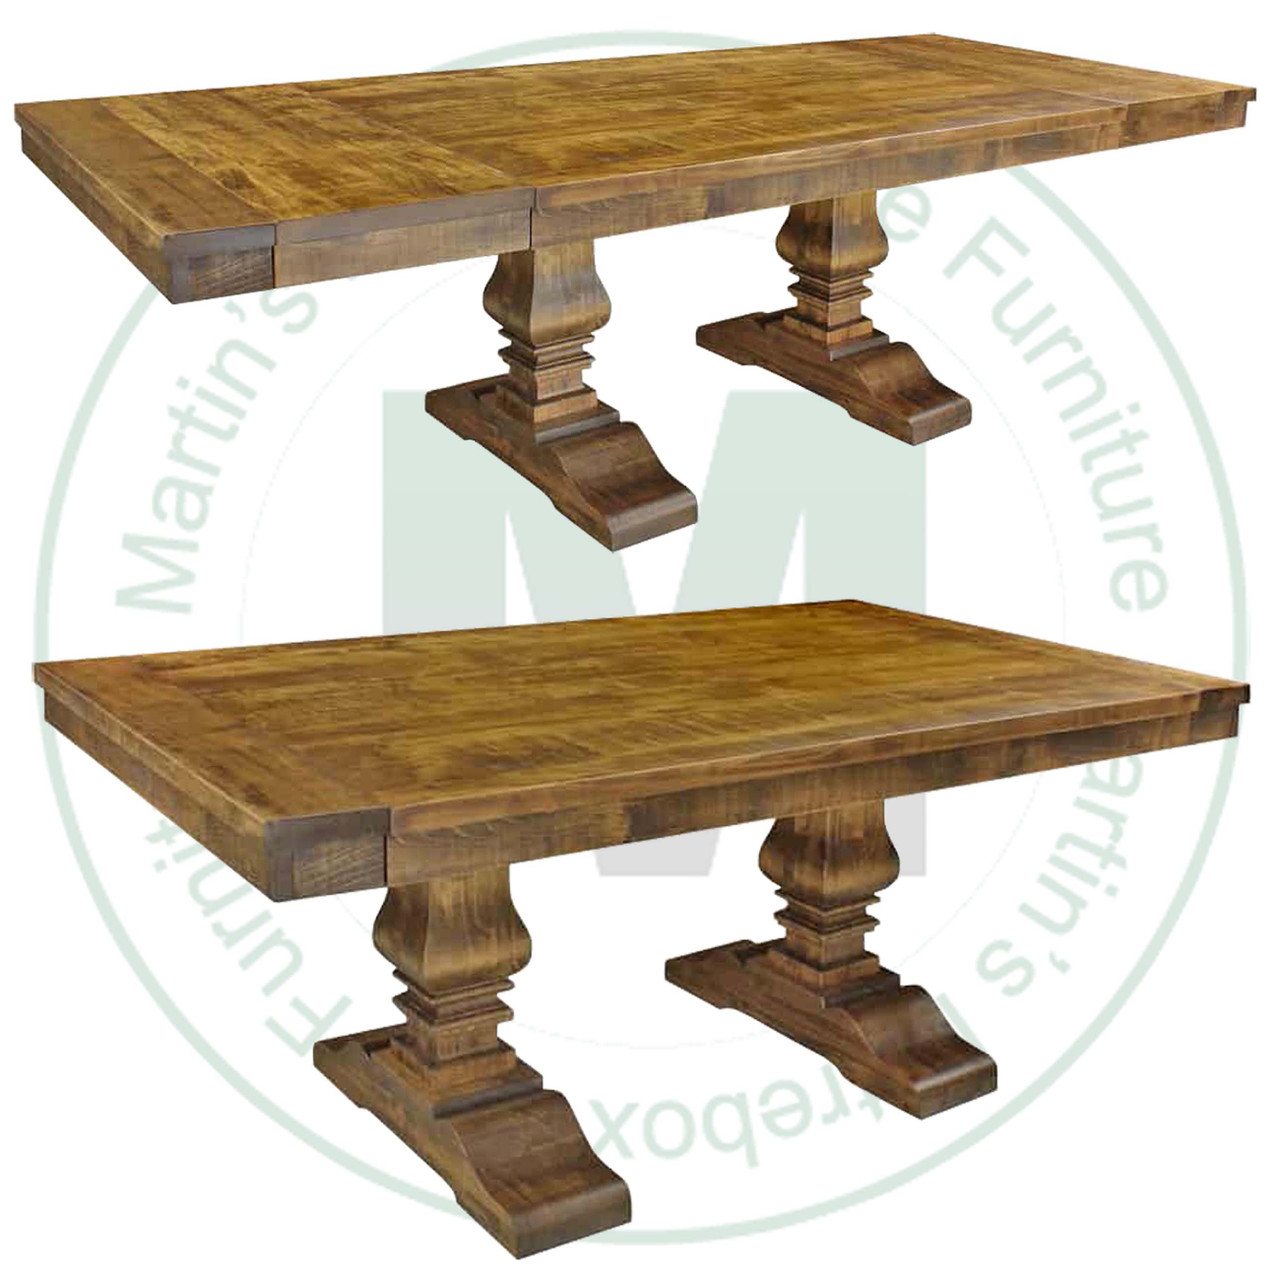 Oak Century Solid Top Double Pedestal Table 36'' Deep x 96'' Wide x 30'' High With 2 - 16'' End Leaves